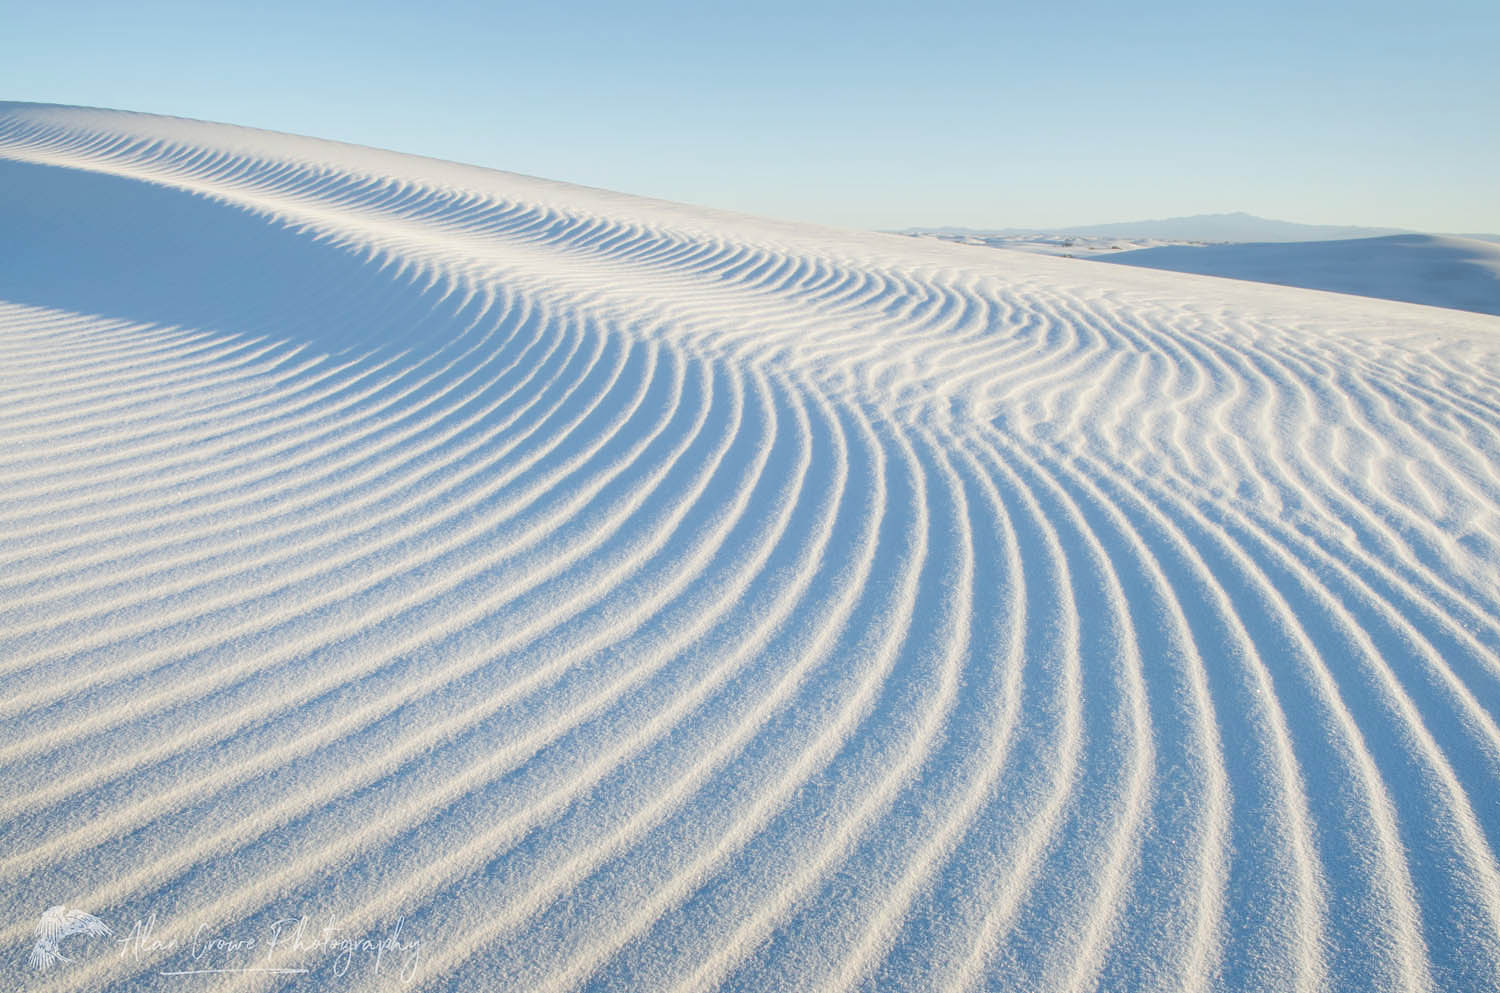 Ripple patterns in gypsum sand dunes, White Sands National Park New Mexico #57050